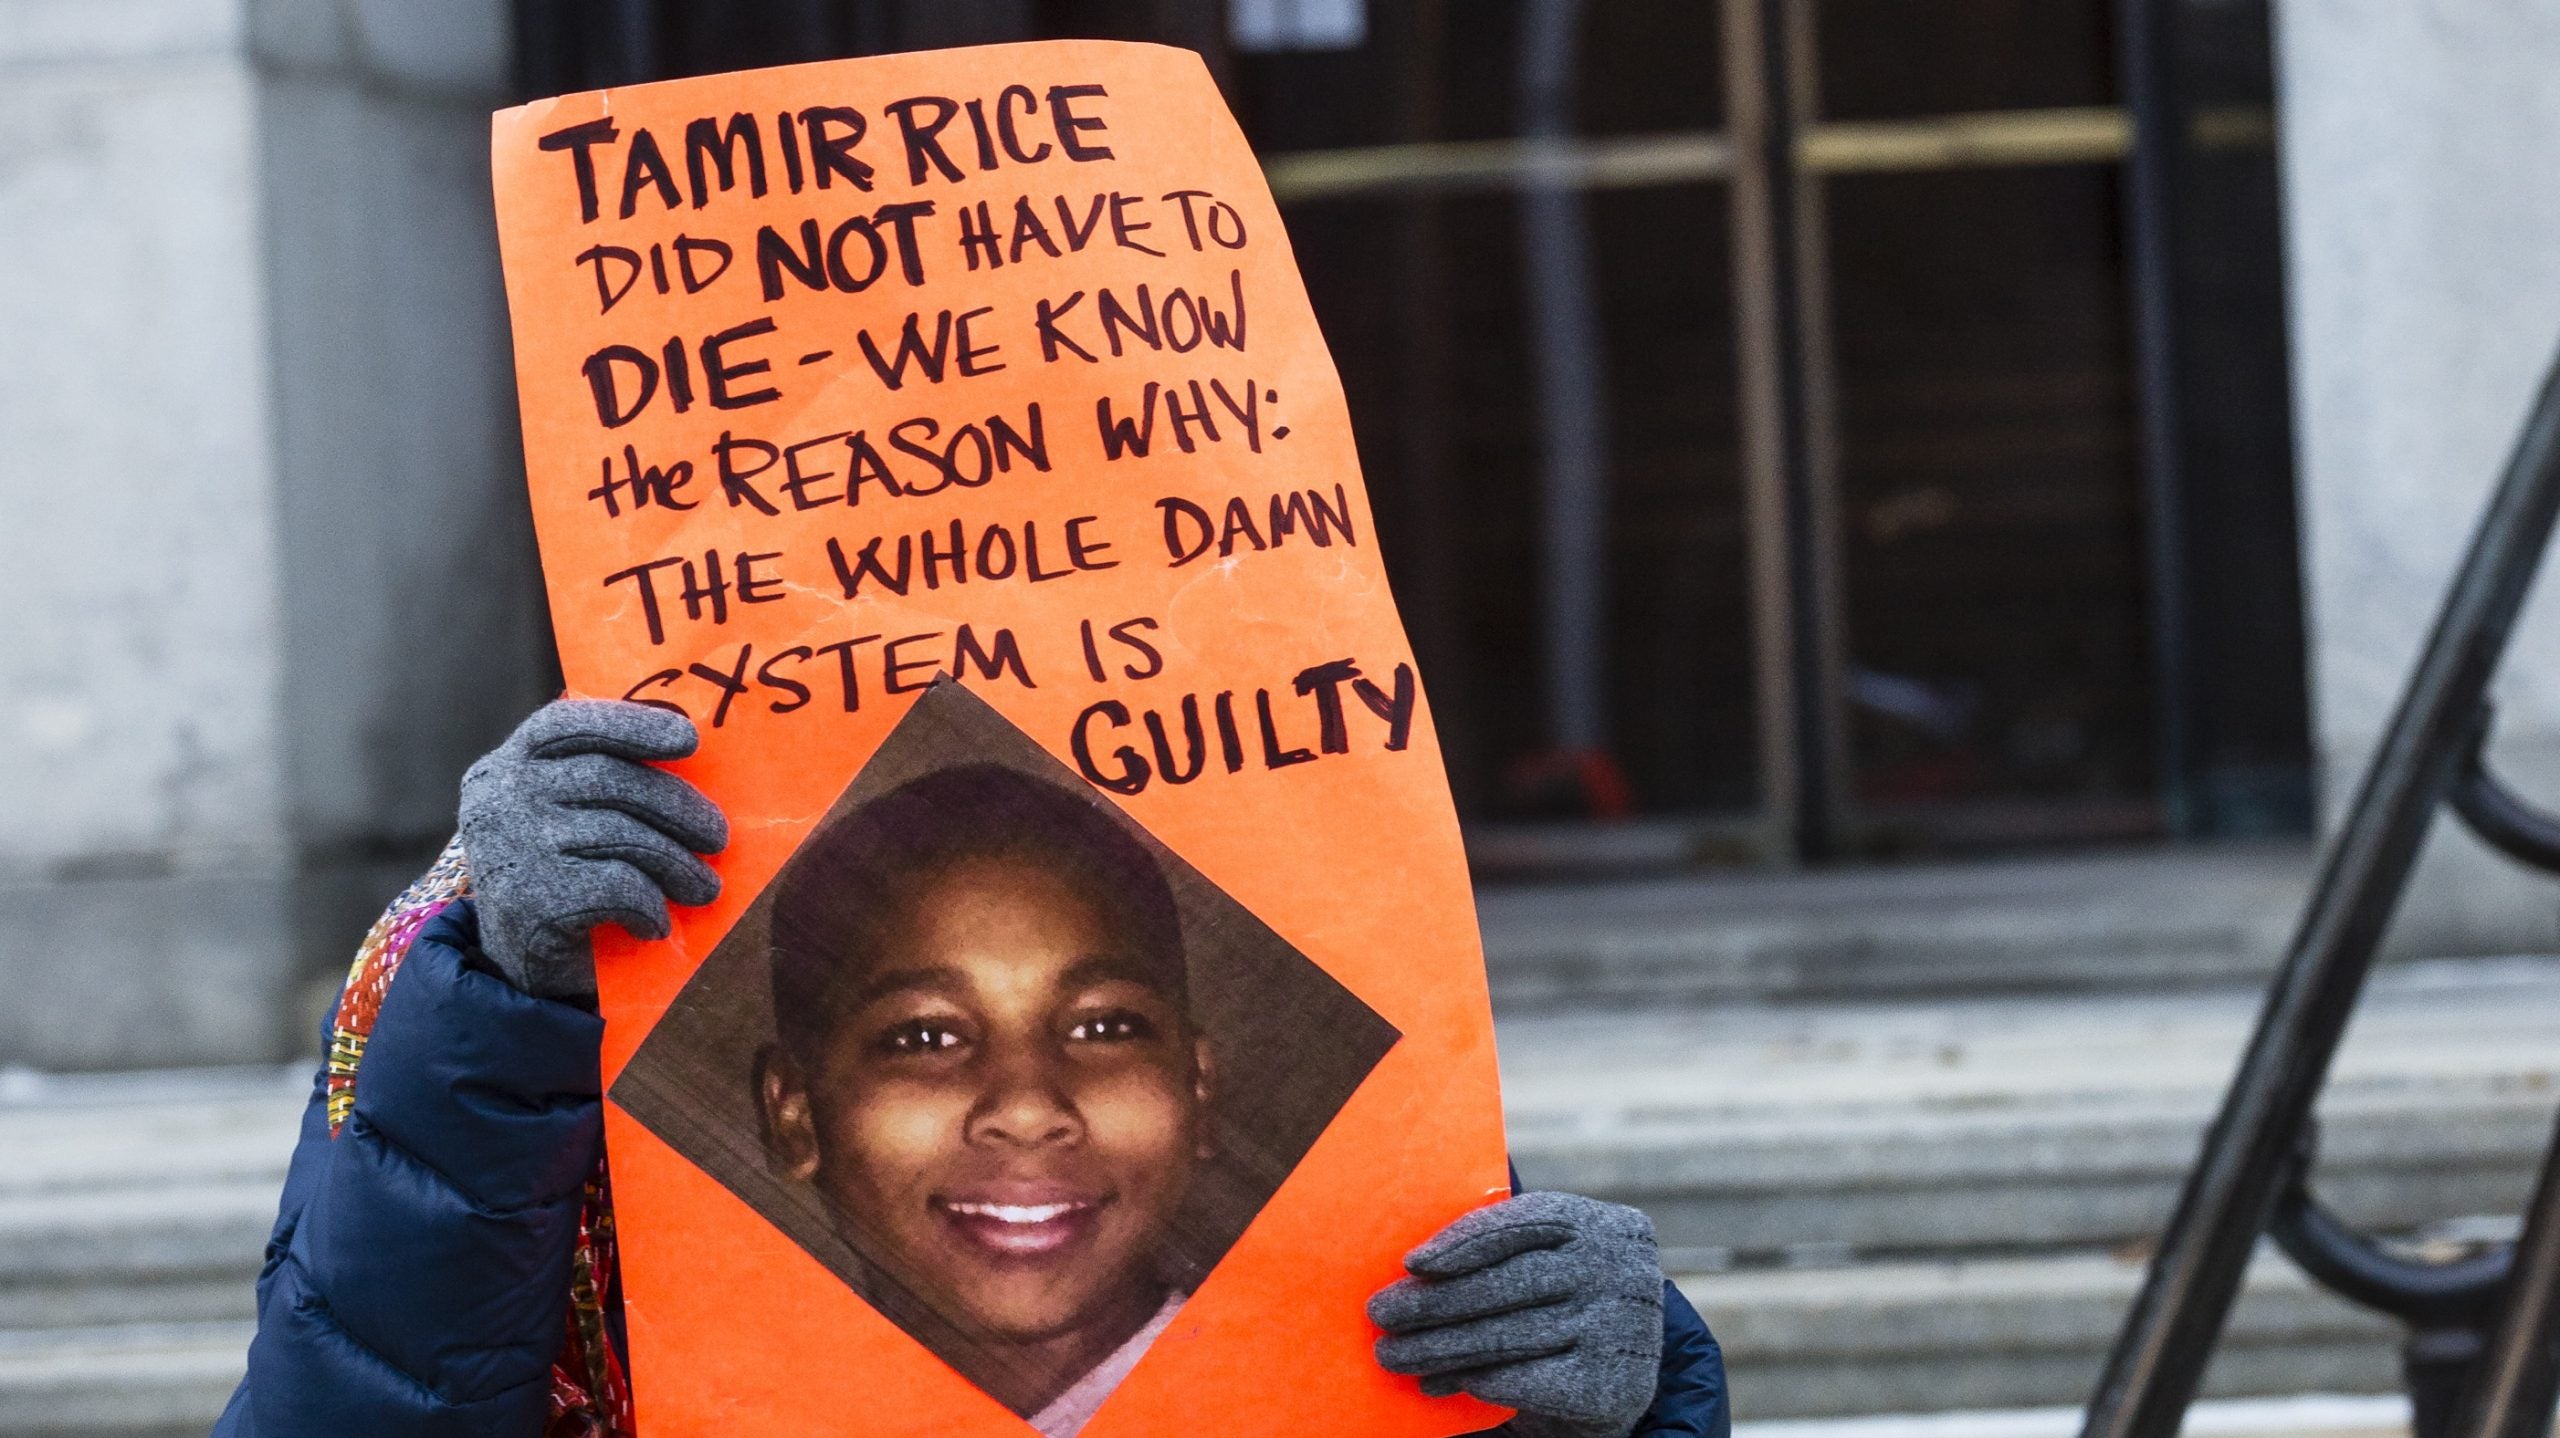 DOJ Stands By Its Decision To Not Reopen Investigation Into Tamir Rice’s Death